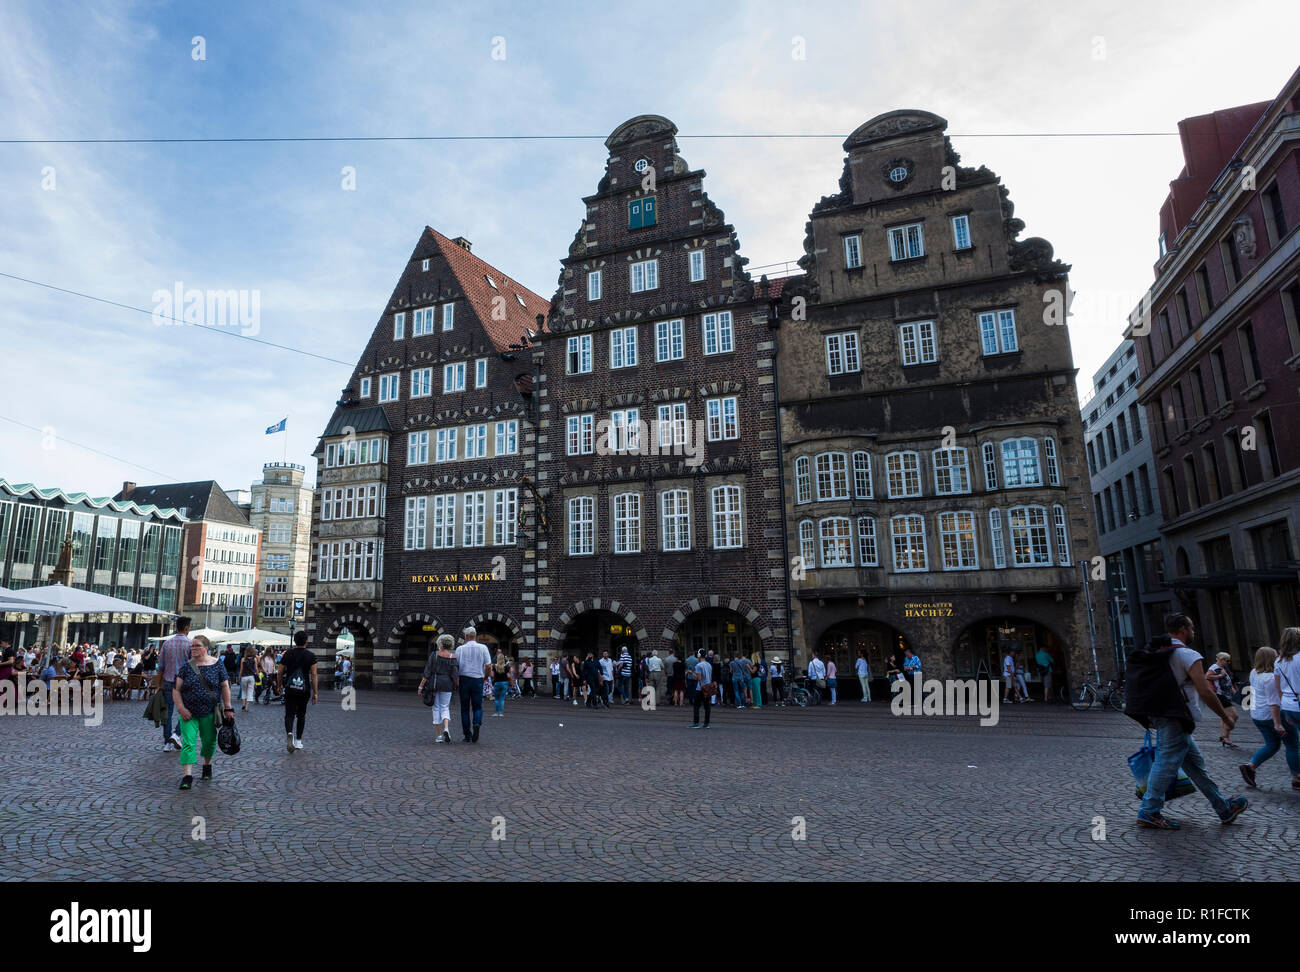 Marktplatz, Bremen. Deutschland Germany.  A scene looking across the market square towards neighbouring business premises whose architecture reflects German traditional styles.  It's a sunny day so there are many tourist holiday makers out exploring and enjoying the sunshine. Stock Photo